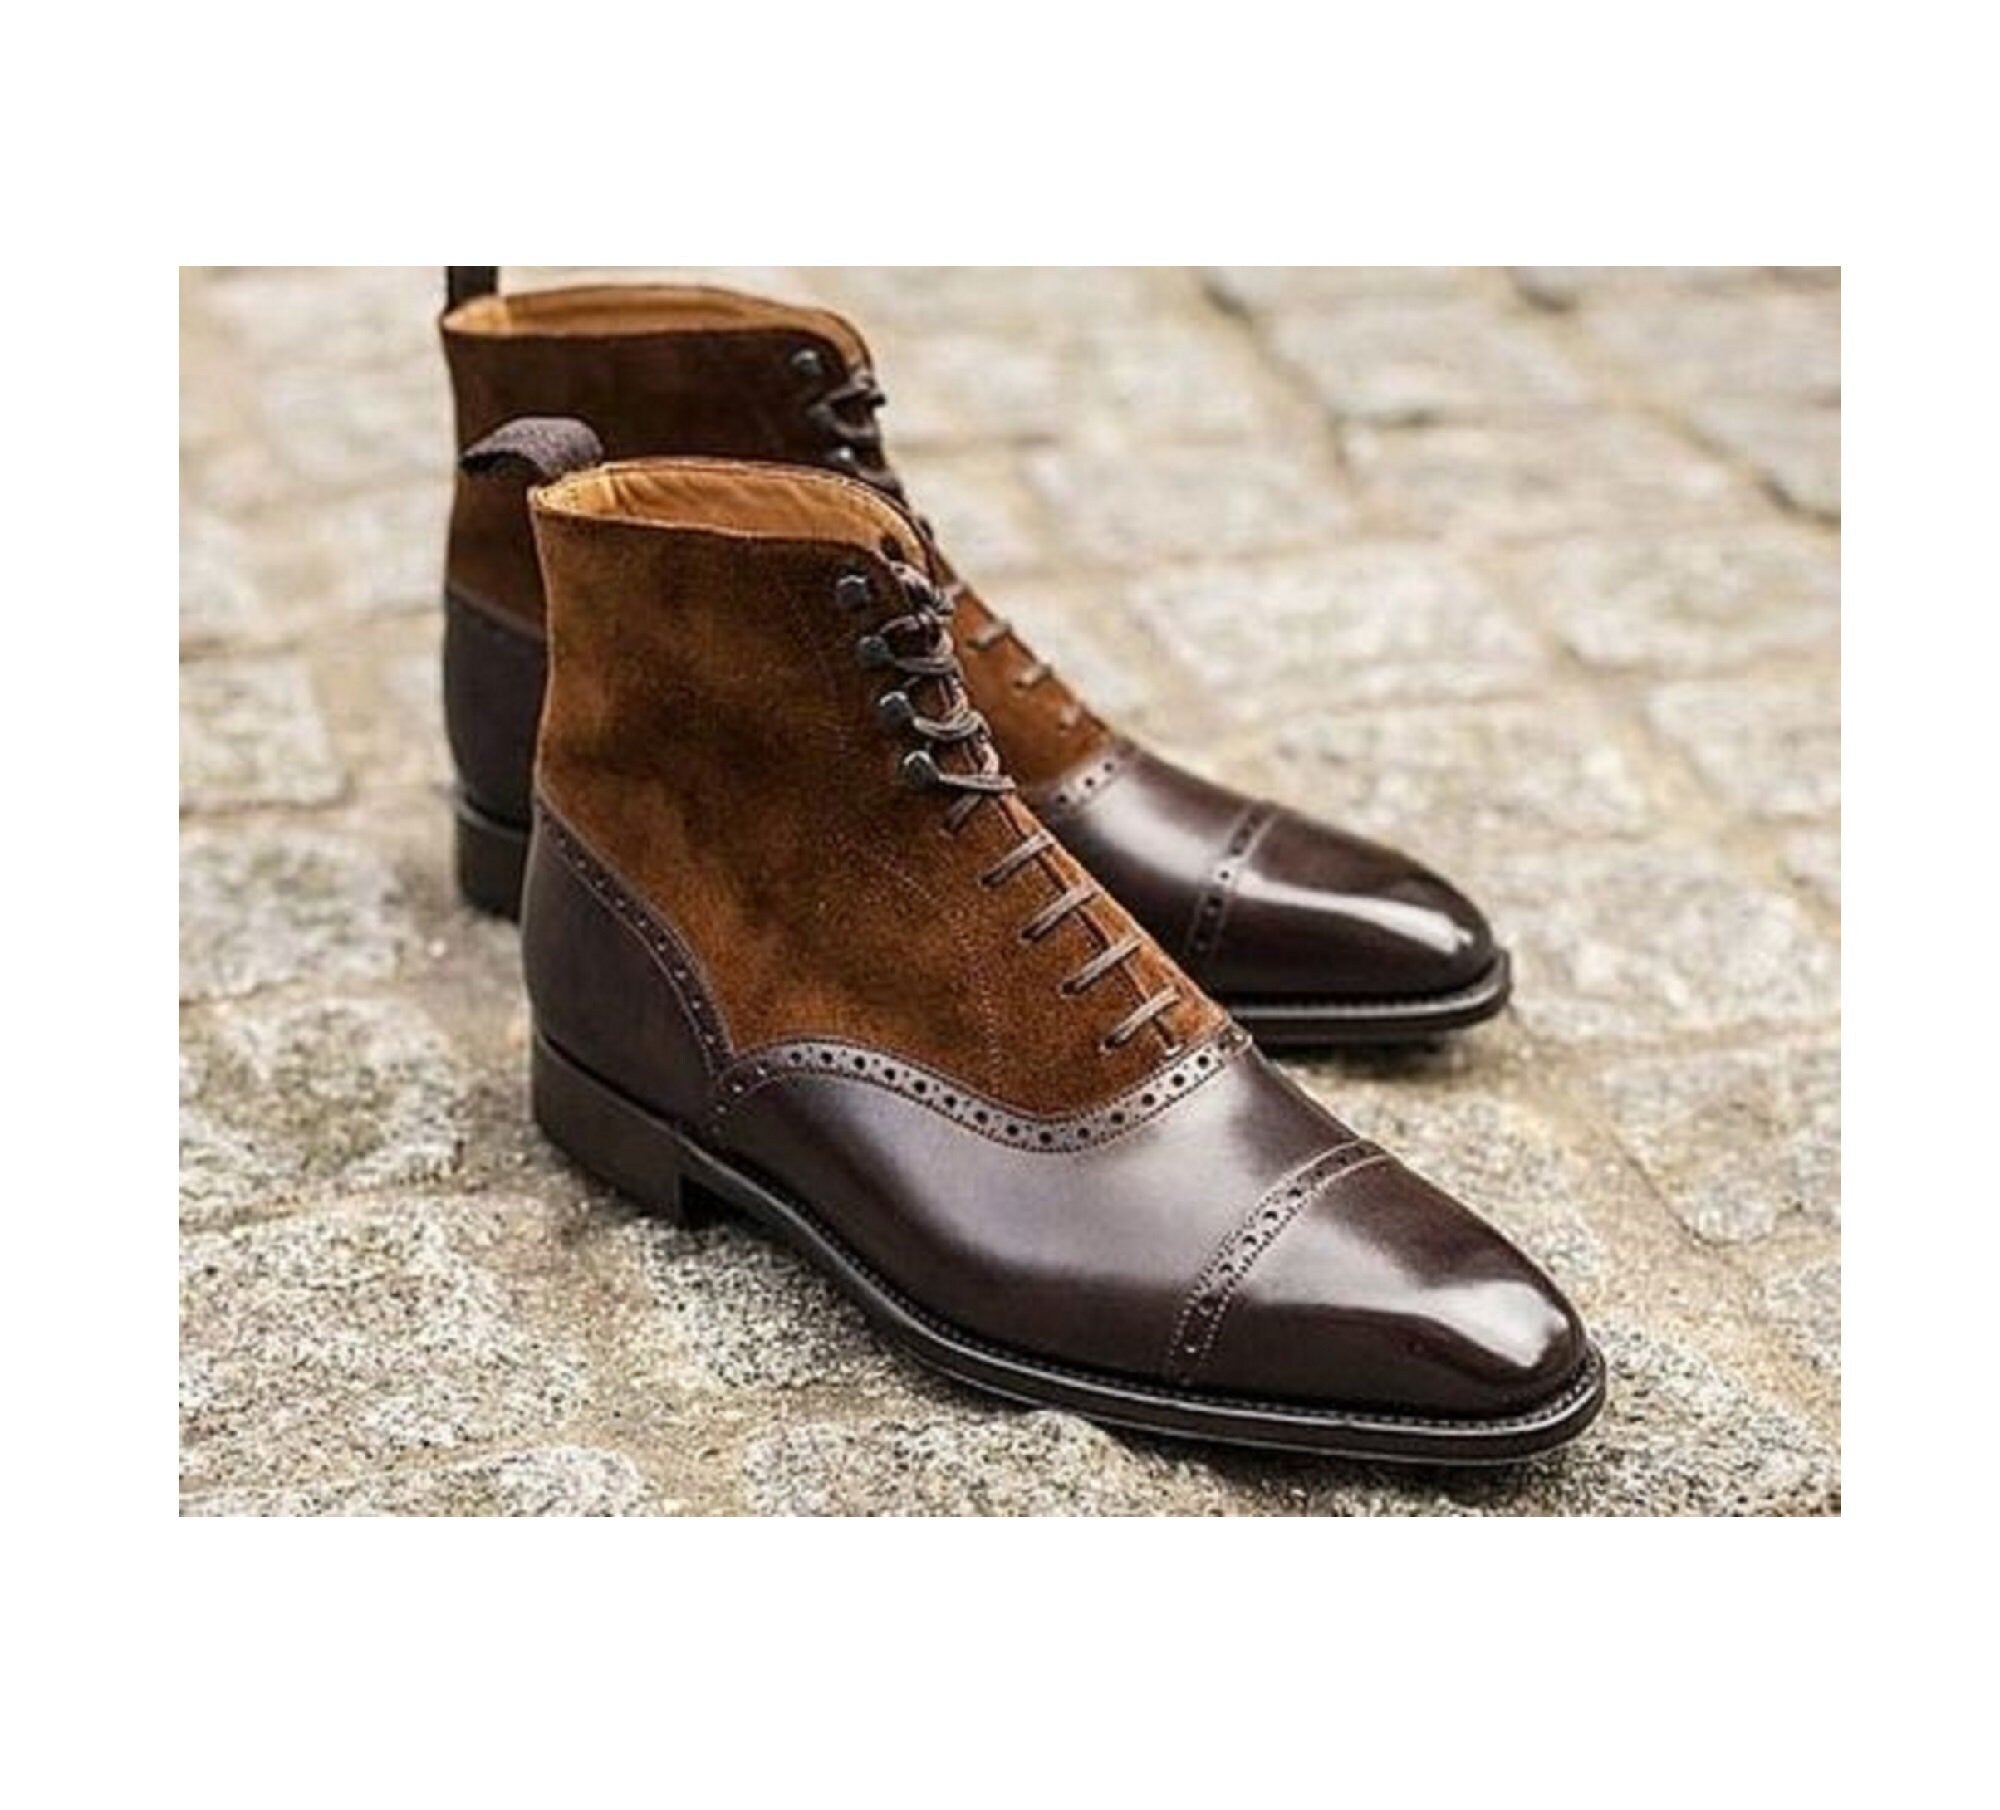 Handmade Bespoke Men's Brown & Suede Leather Upper Lace Up ,Cap Toe Ankle High Boots, Men boots